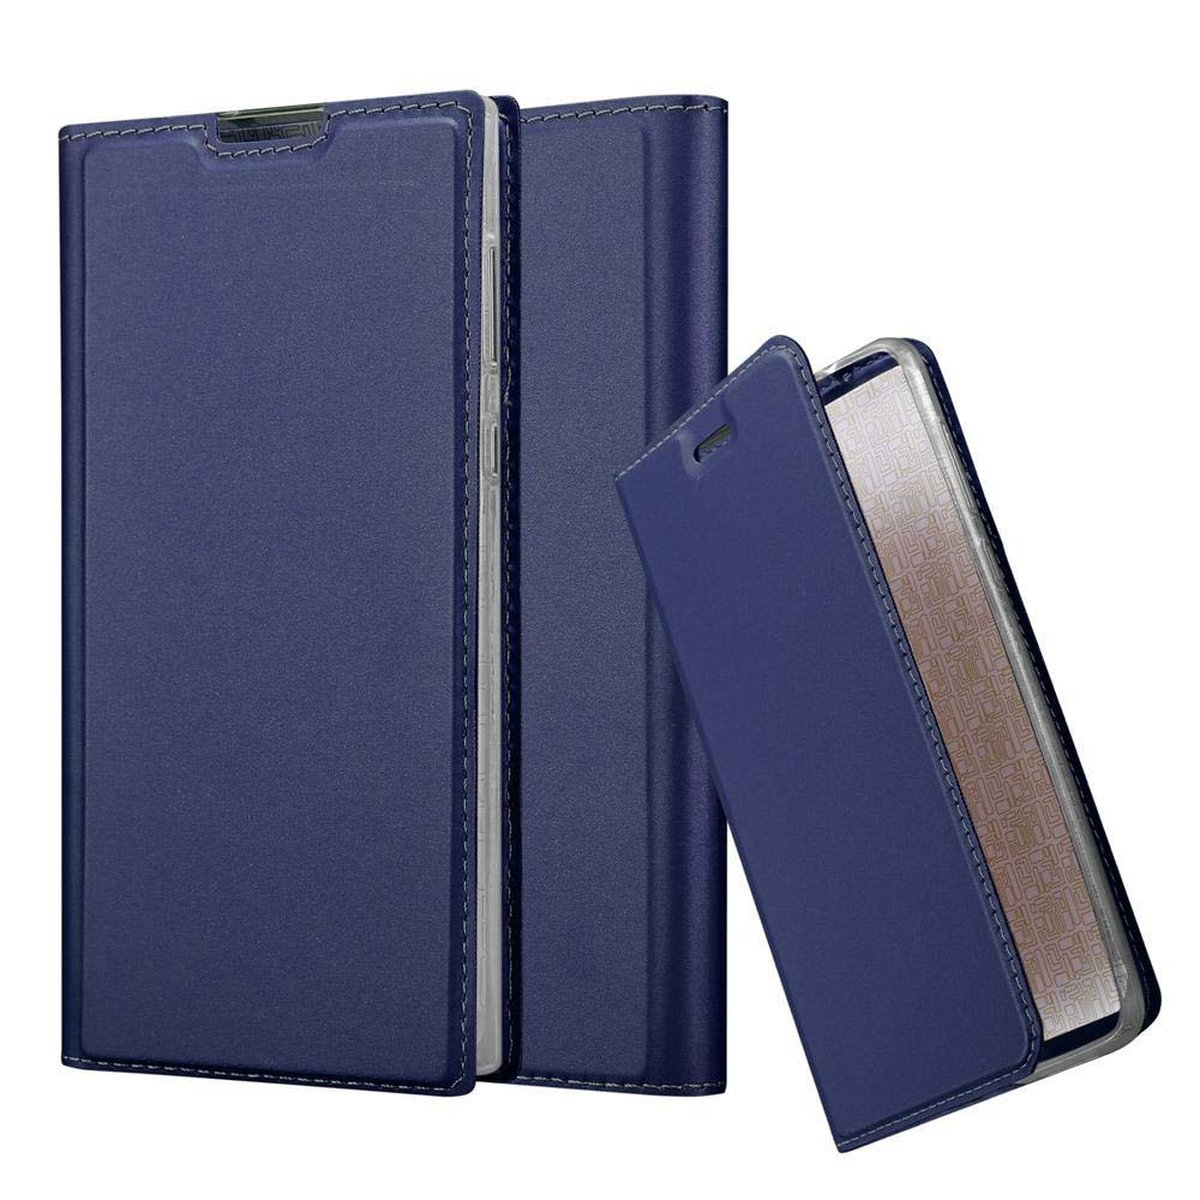 Classy CLASSY Style, L1, Xperia Book Sony, BLAU Bookcover, CADORABO Handyhülle DUNKEL